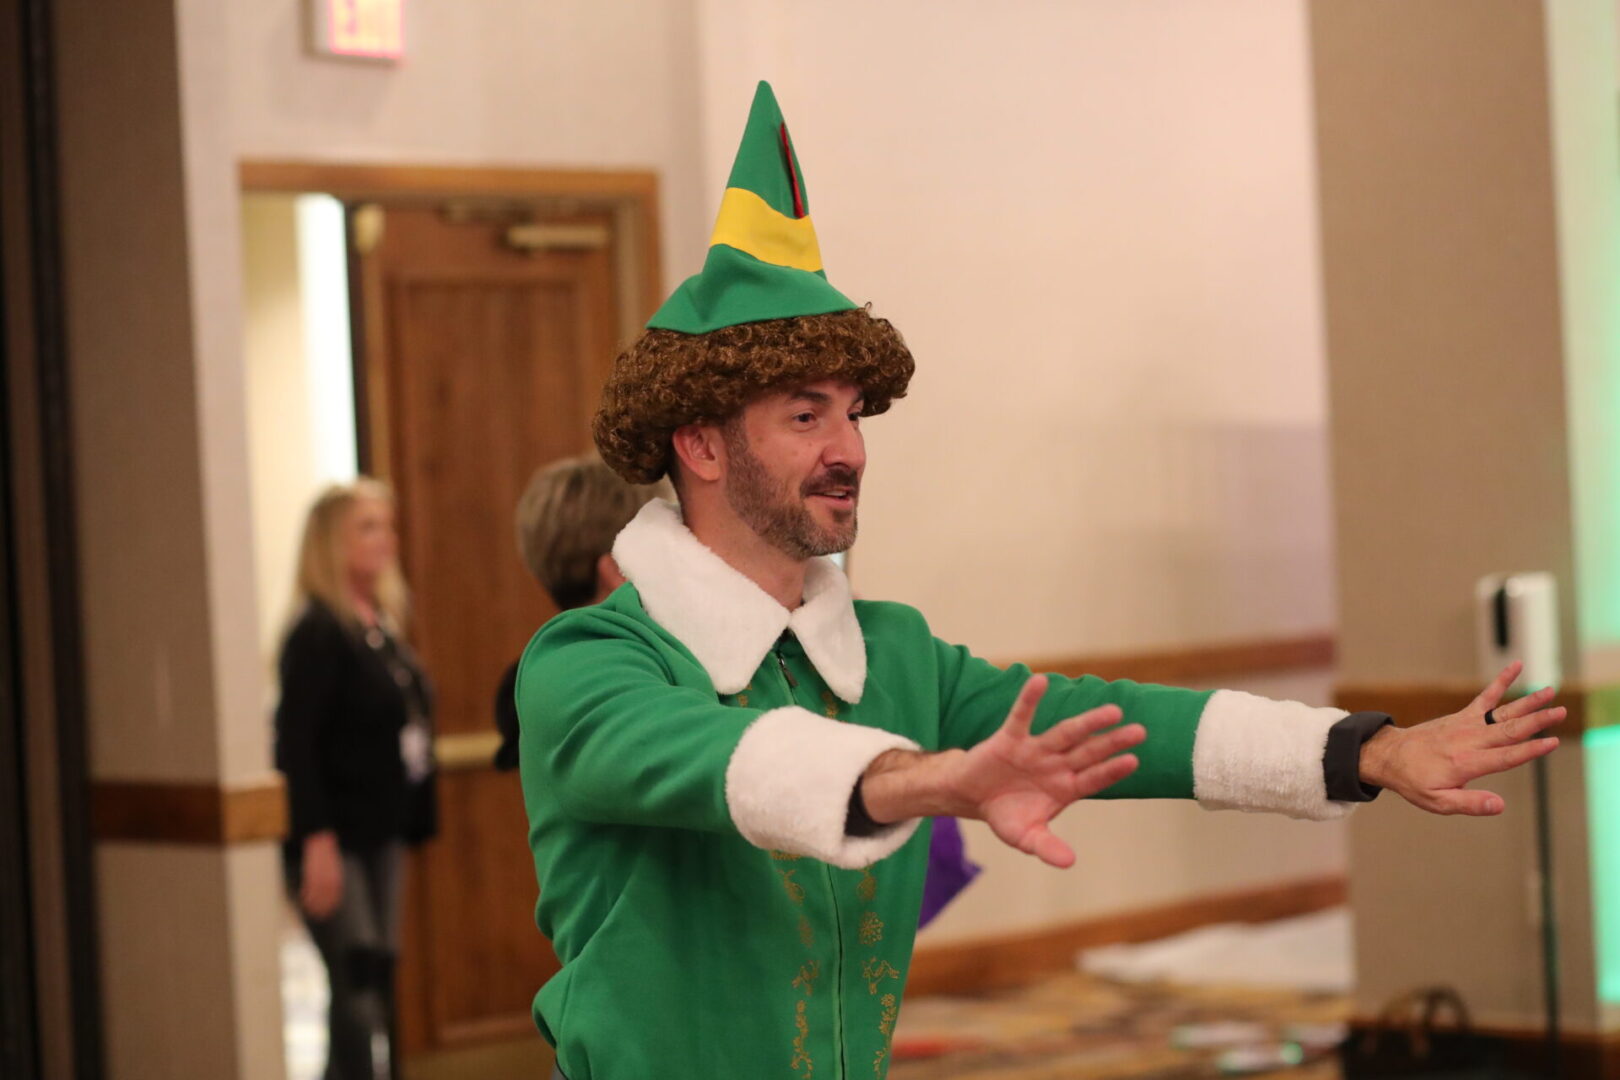 A man in green elf costume and hat